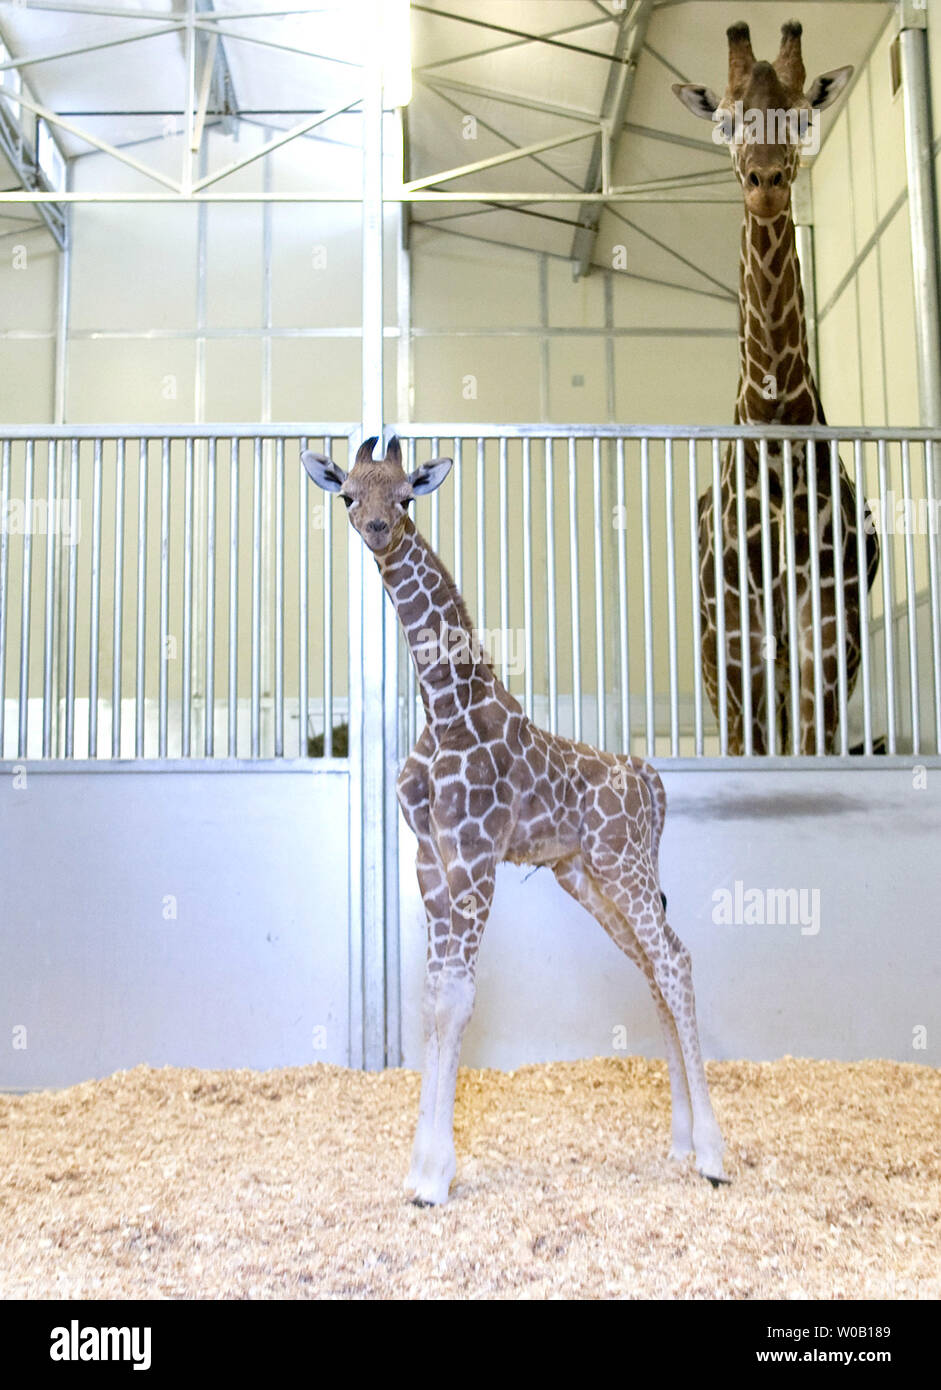 Six Flags Discovery Kingdom's newest edition, a 145-lb., approximately 5-foot 10-inch inch tall male giraffe calf born on December 14,  is pictured with his six-year-old father, Nyumekye (NOO-MEH-KEE), at Six Flags Discovery Kingdom, Vallejo, California, on December 23, 2009.    UPI/Ken James Stock Photo